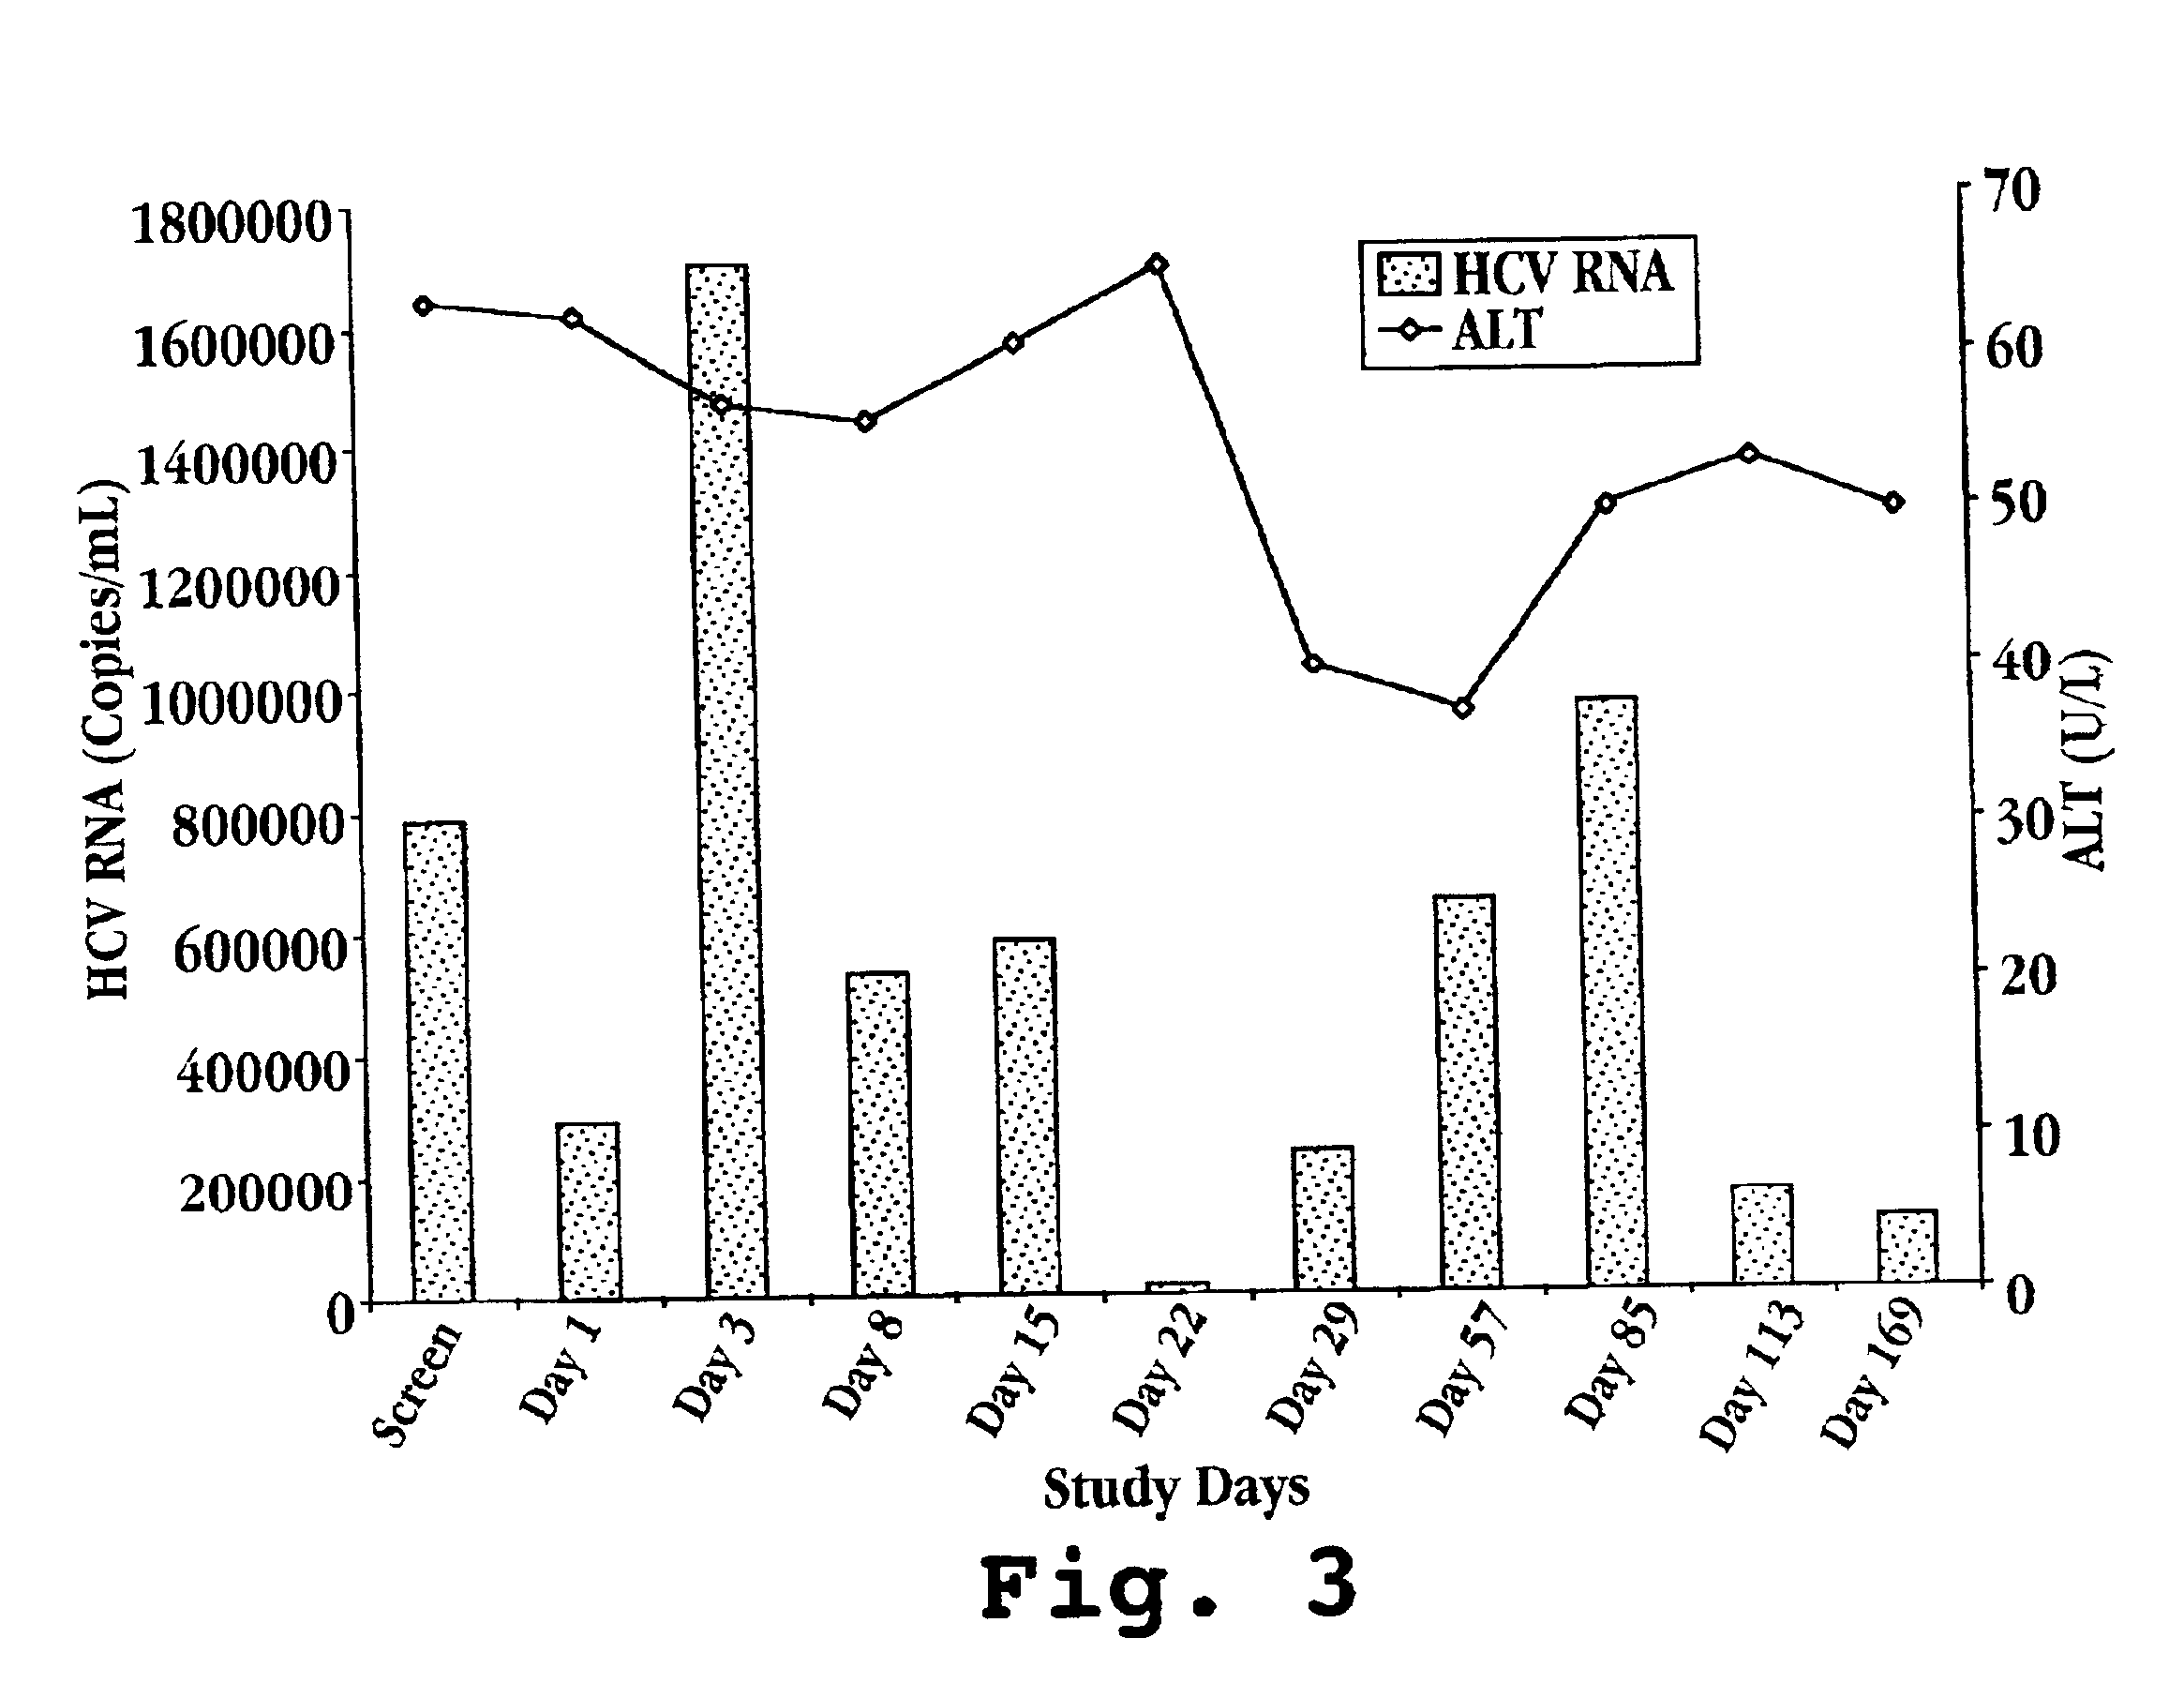 Composition for treatment of and method of monitoring hepatitis C virus using interferon-TAU